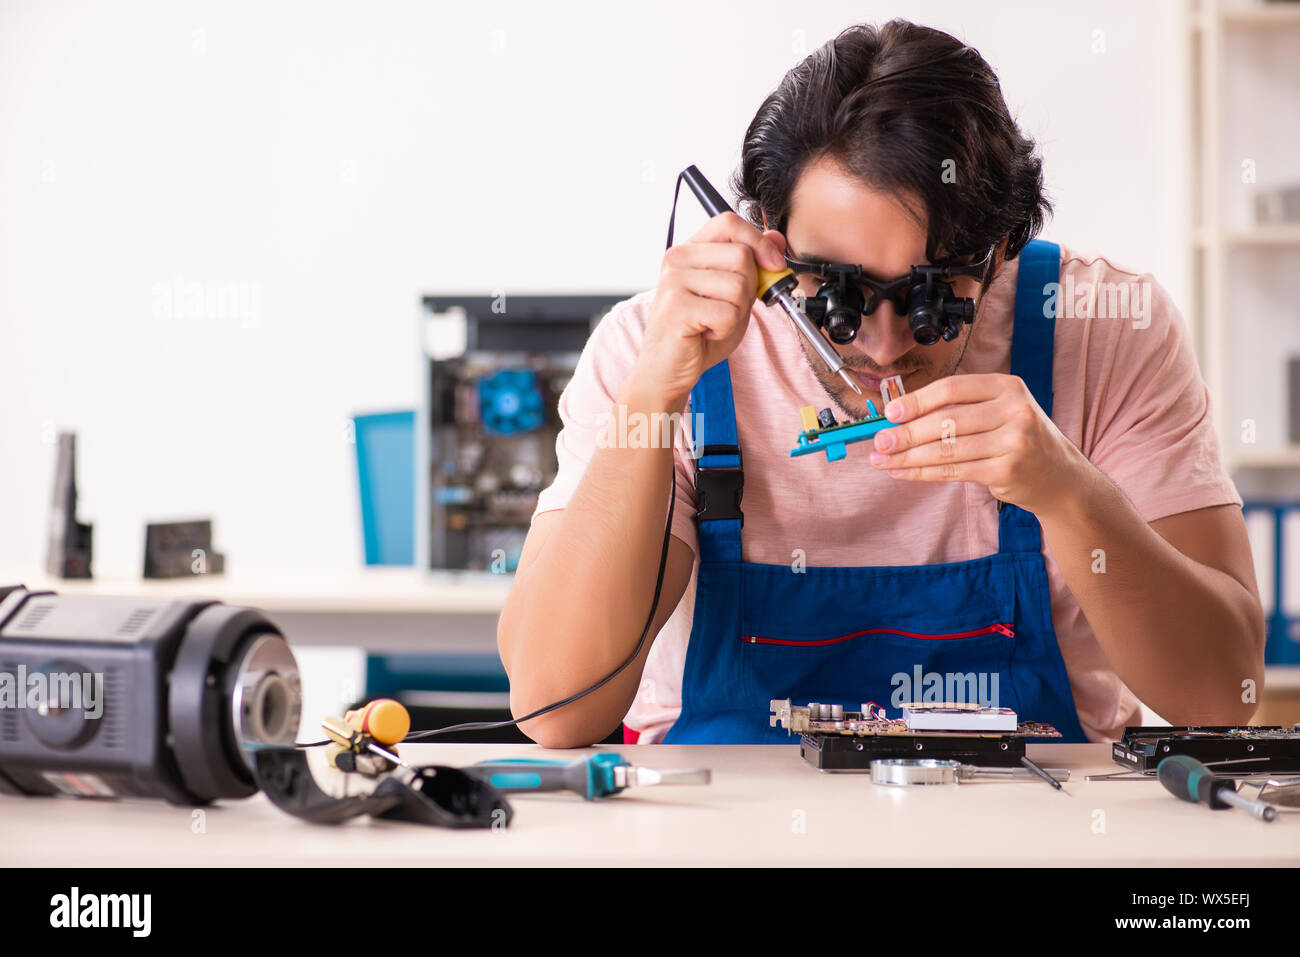 Young male contractor repairing computer Stock Photo